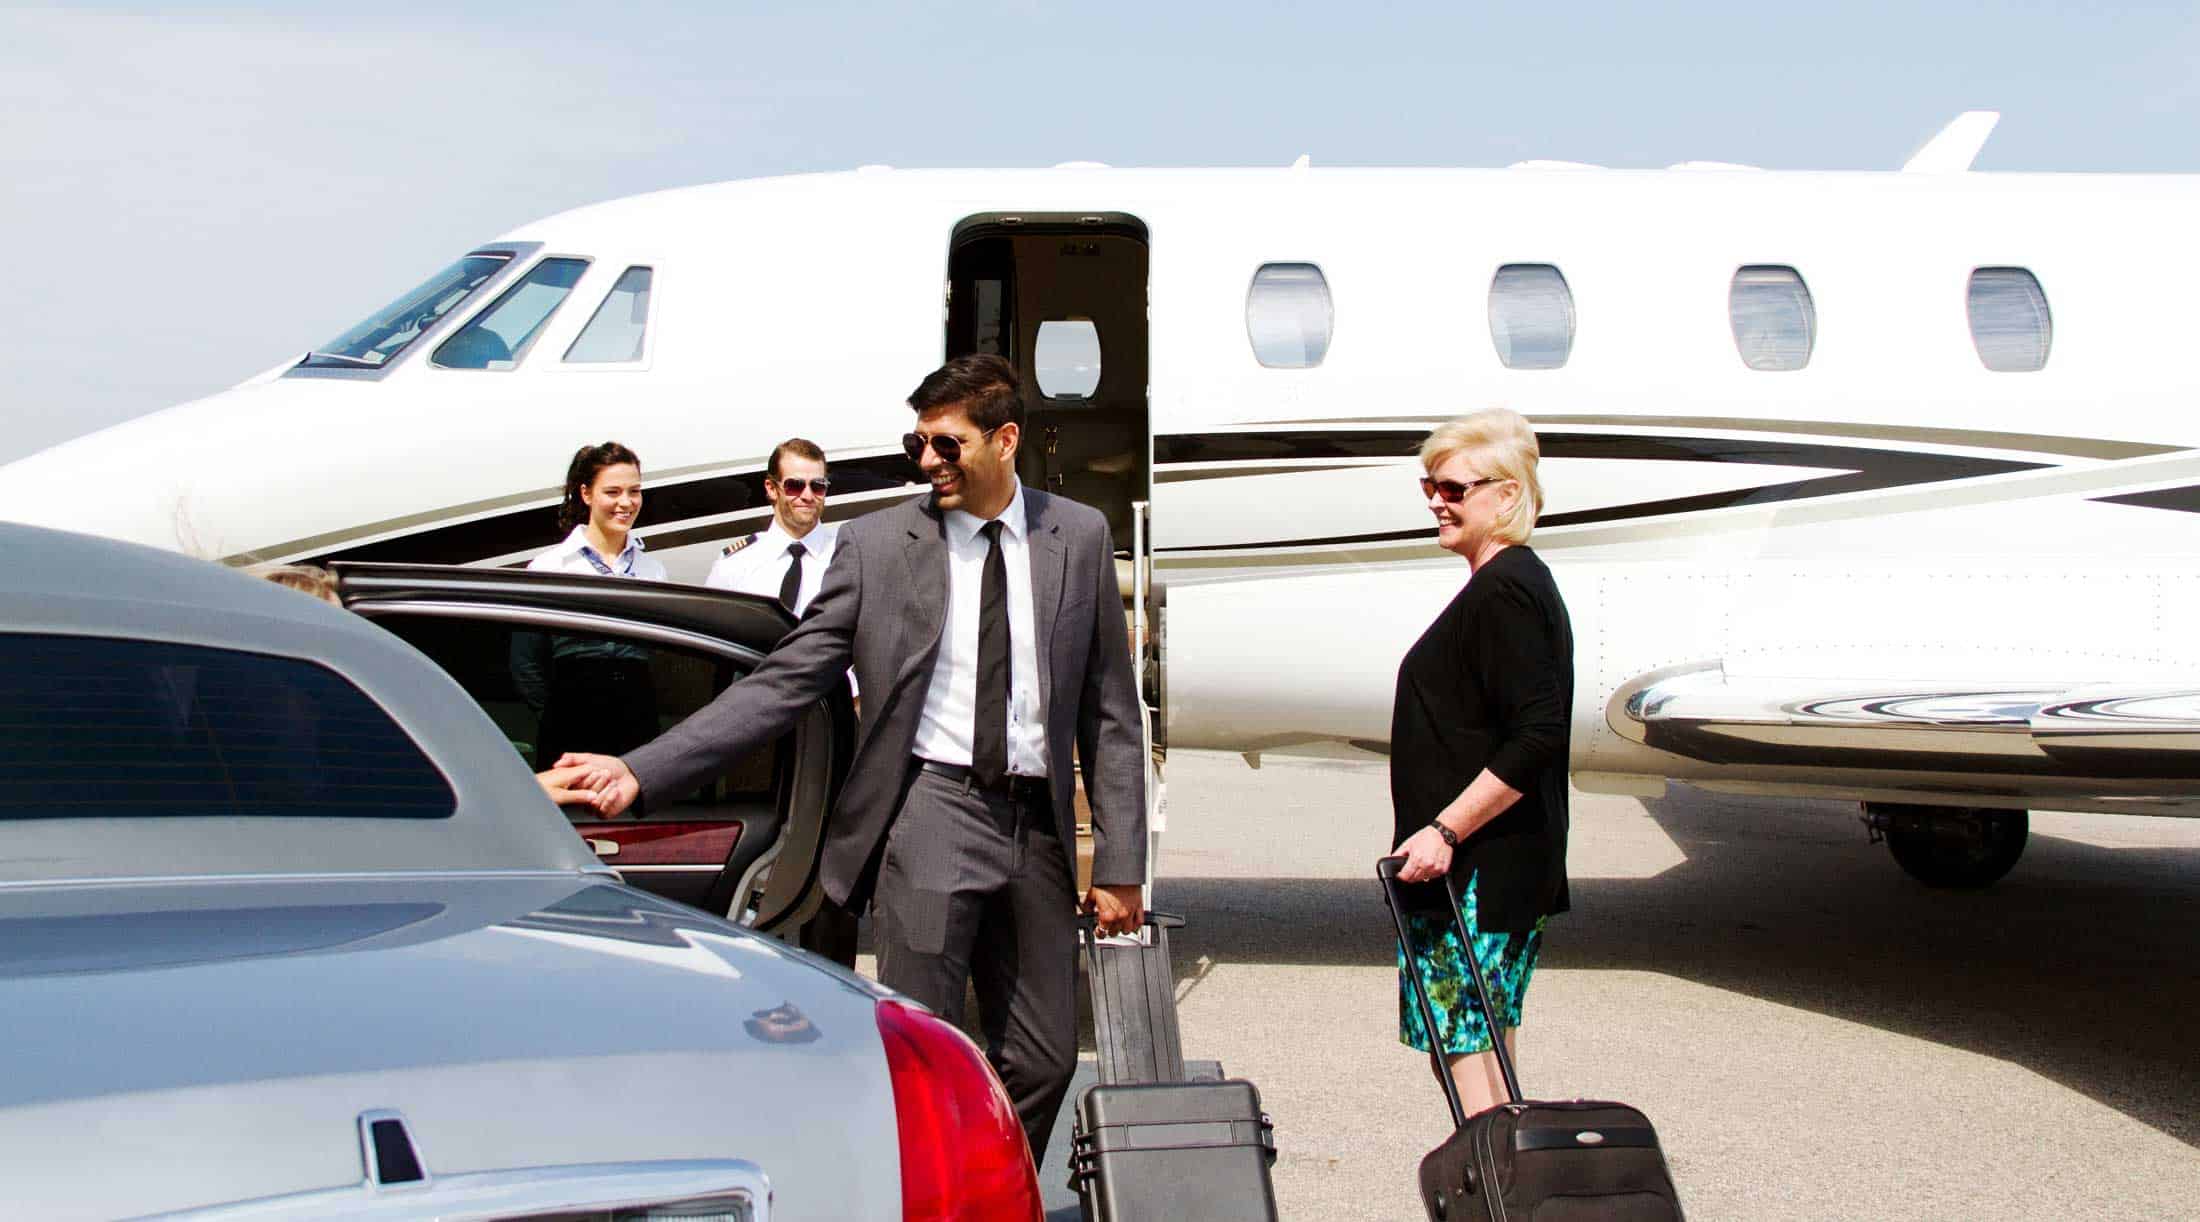 Get Rid Of Your Preflight Troubles With Airport Transportation